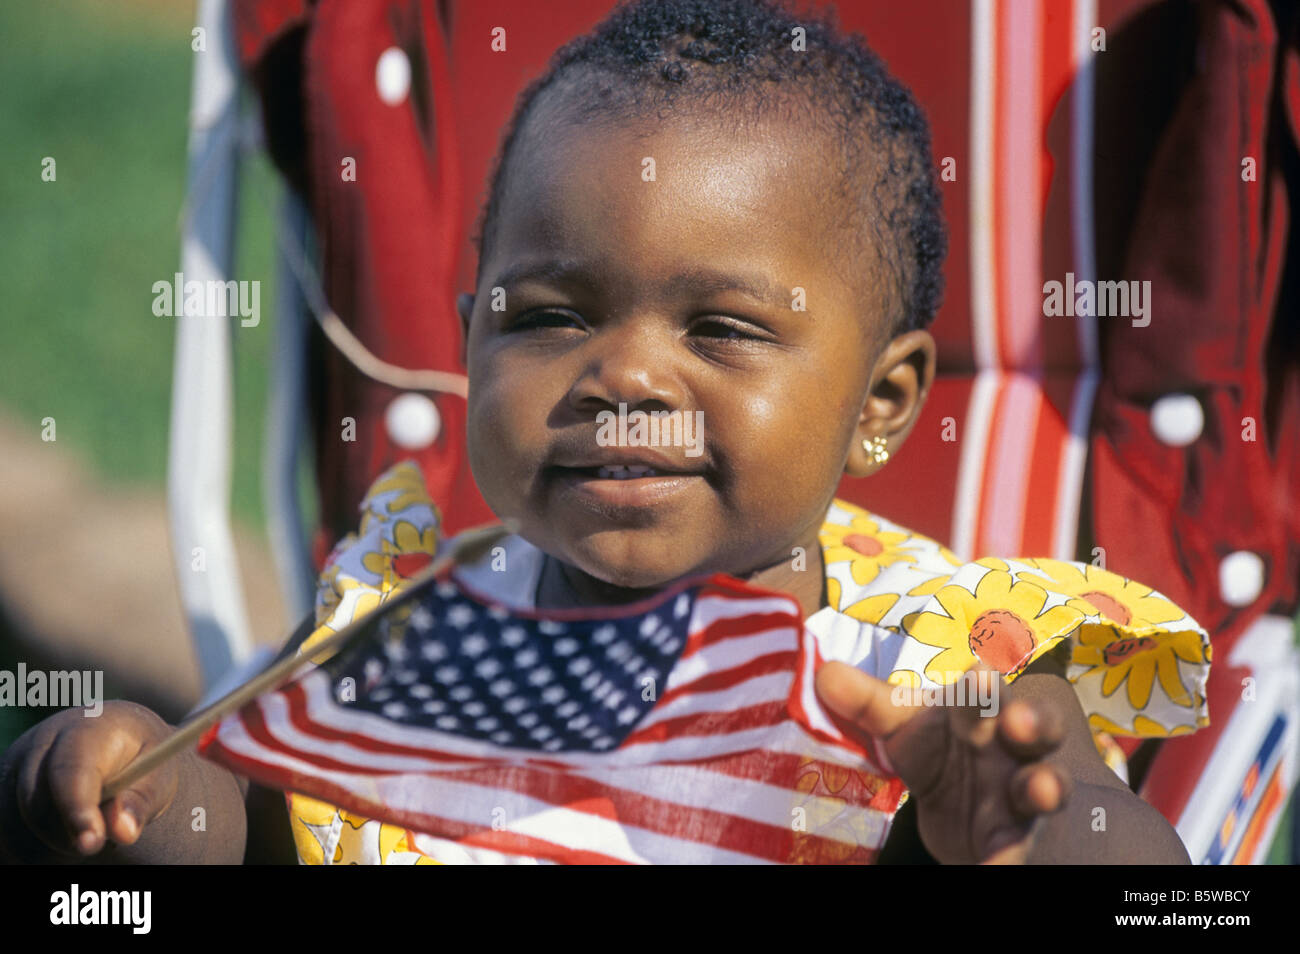 A cute little african american girl watches a 4th of july Fourth Of July July 4th parade while waving an American flag, St. Louis, Missouri. Stock Photo